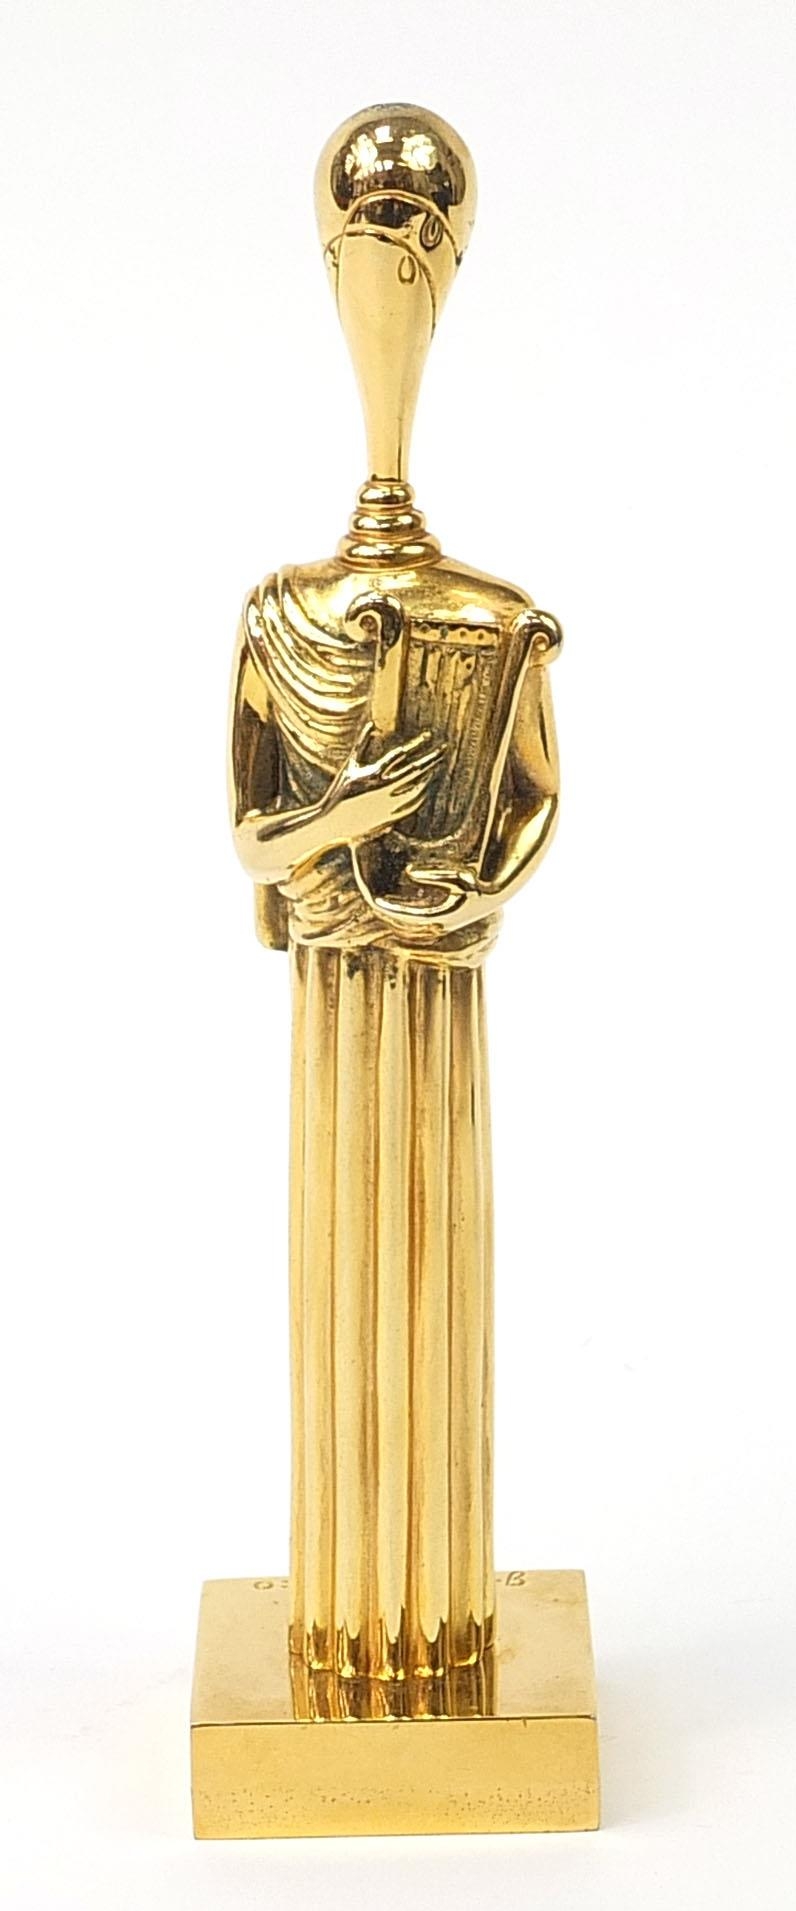 Giorgio de Chirico, Muse of the Music, Italian brass sculpture with fitted case having Fratelli